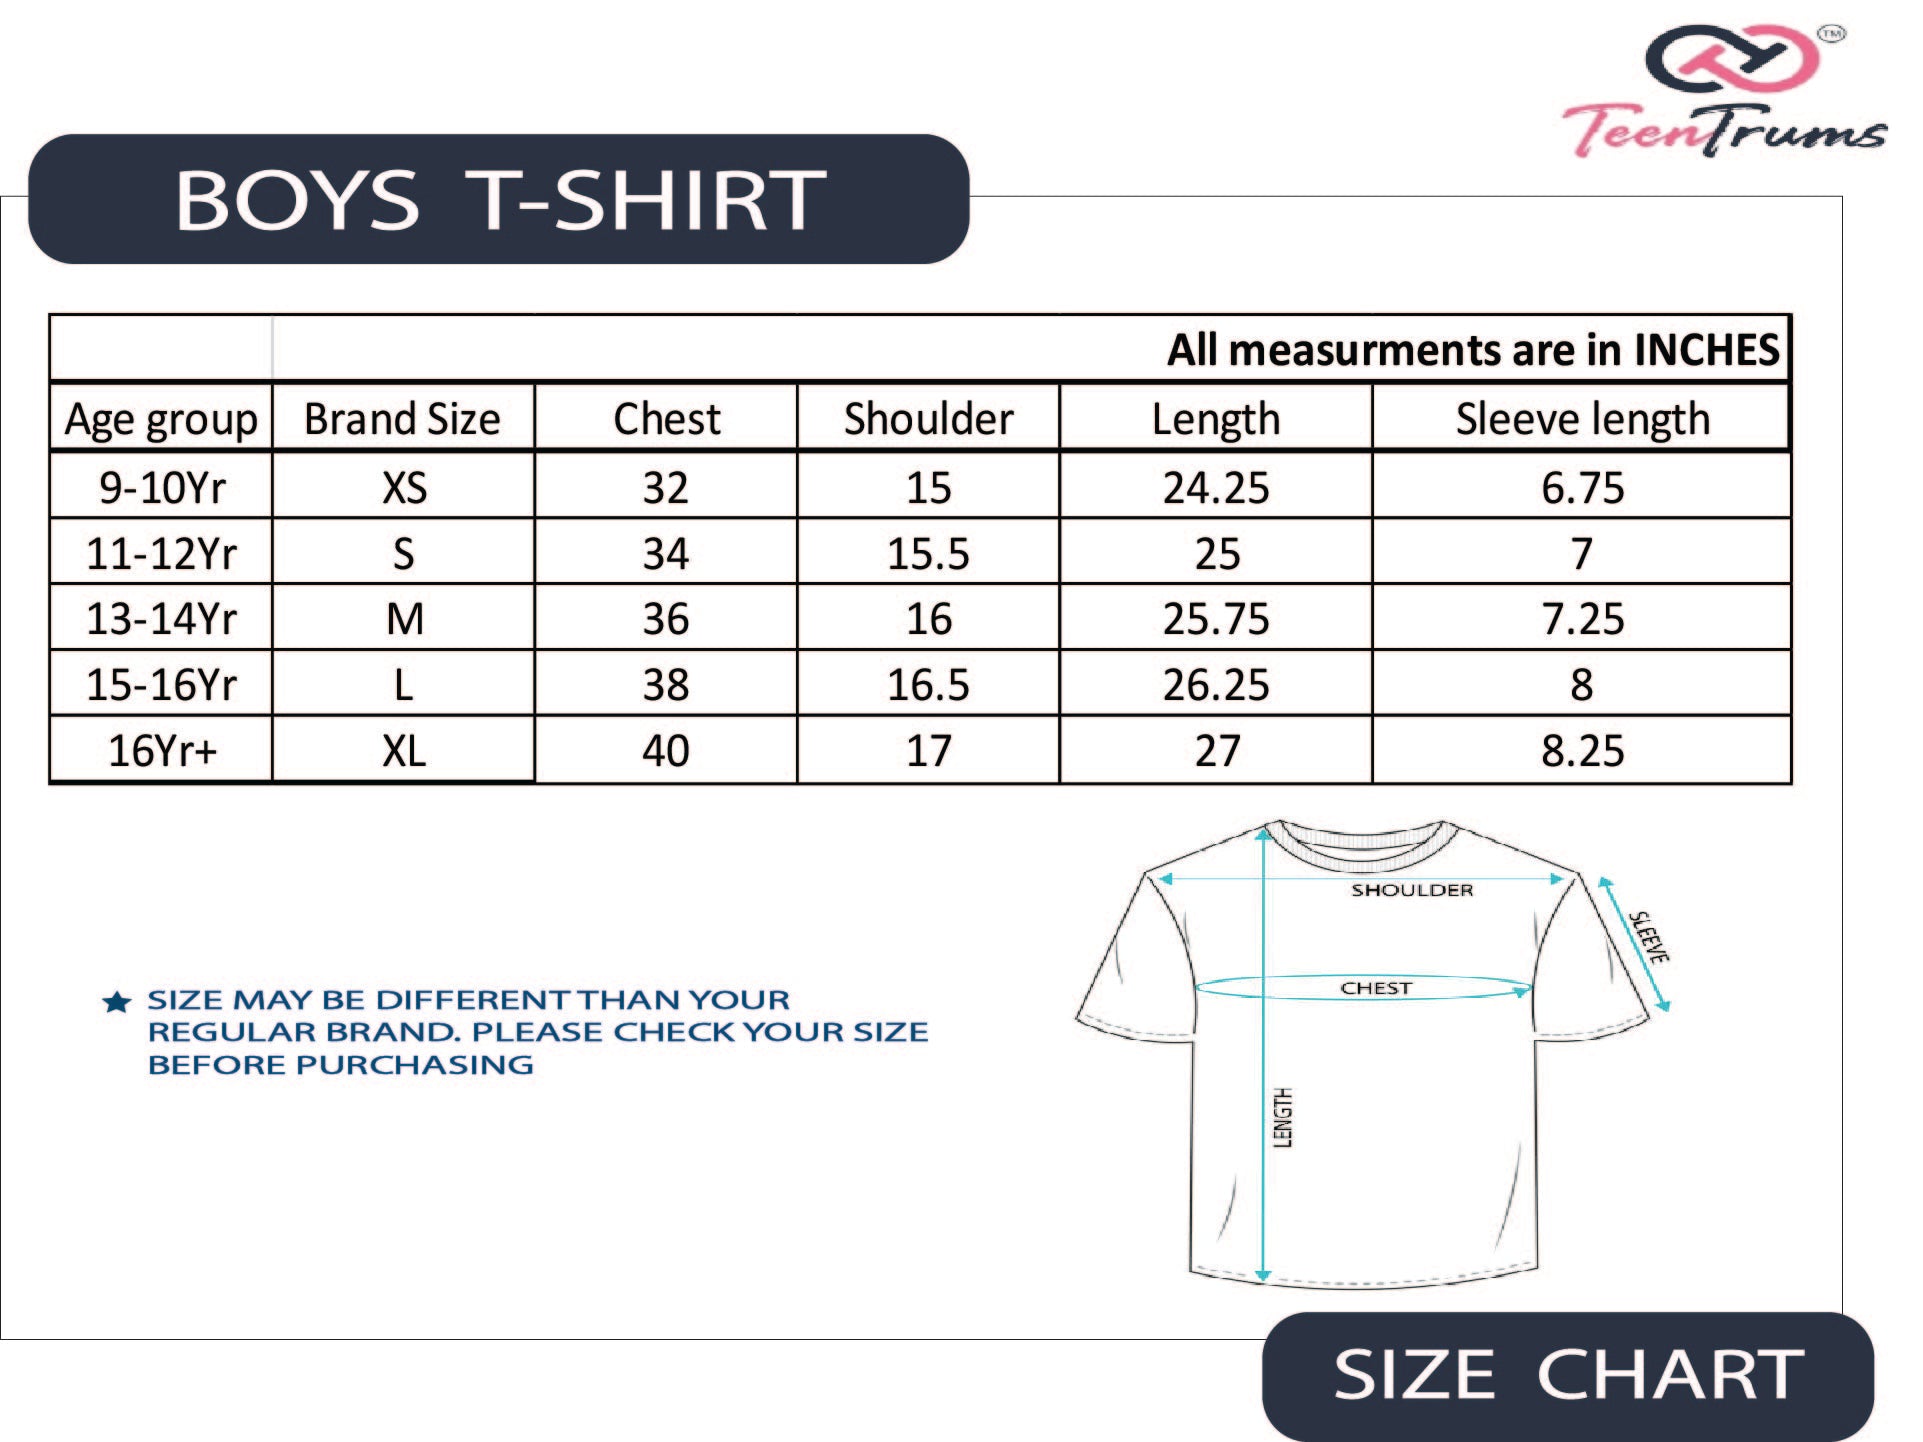 TeenTrums Pack of 3 100% Cotton Cool Graphic Printed T-Shirt for Boys - Black/ White / Dark Teal